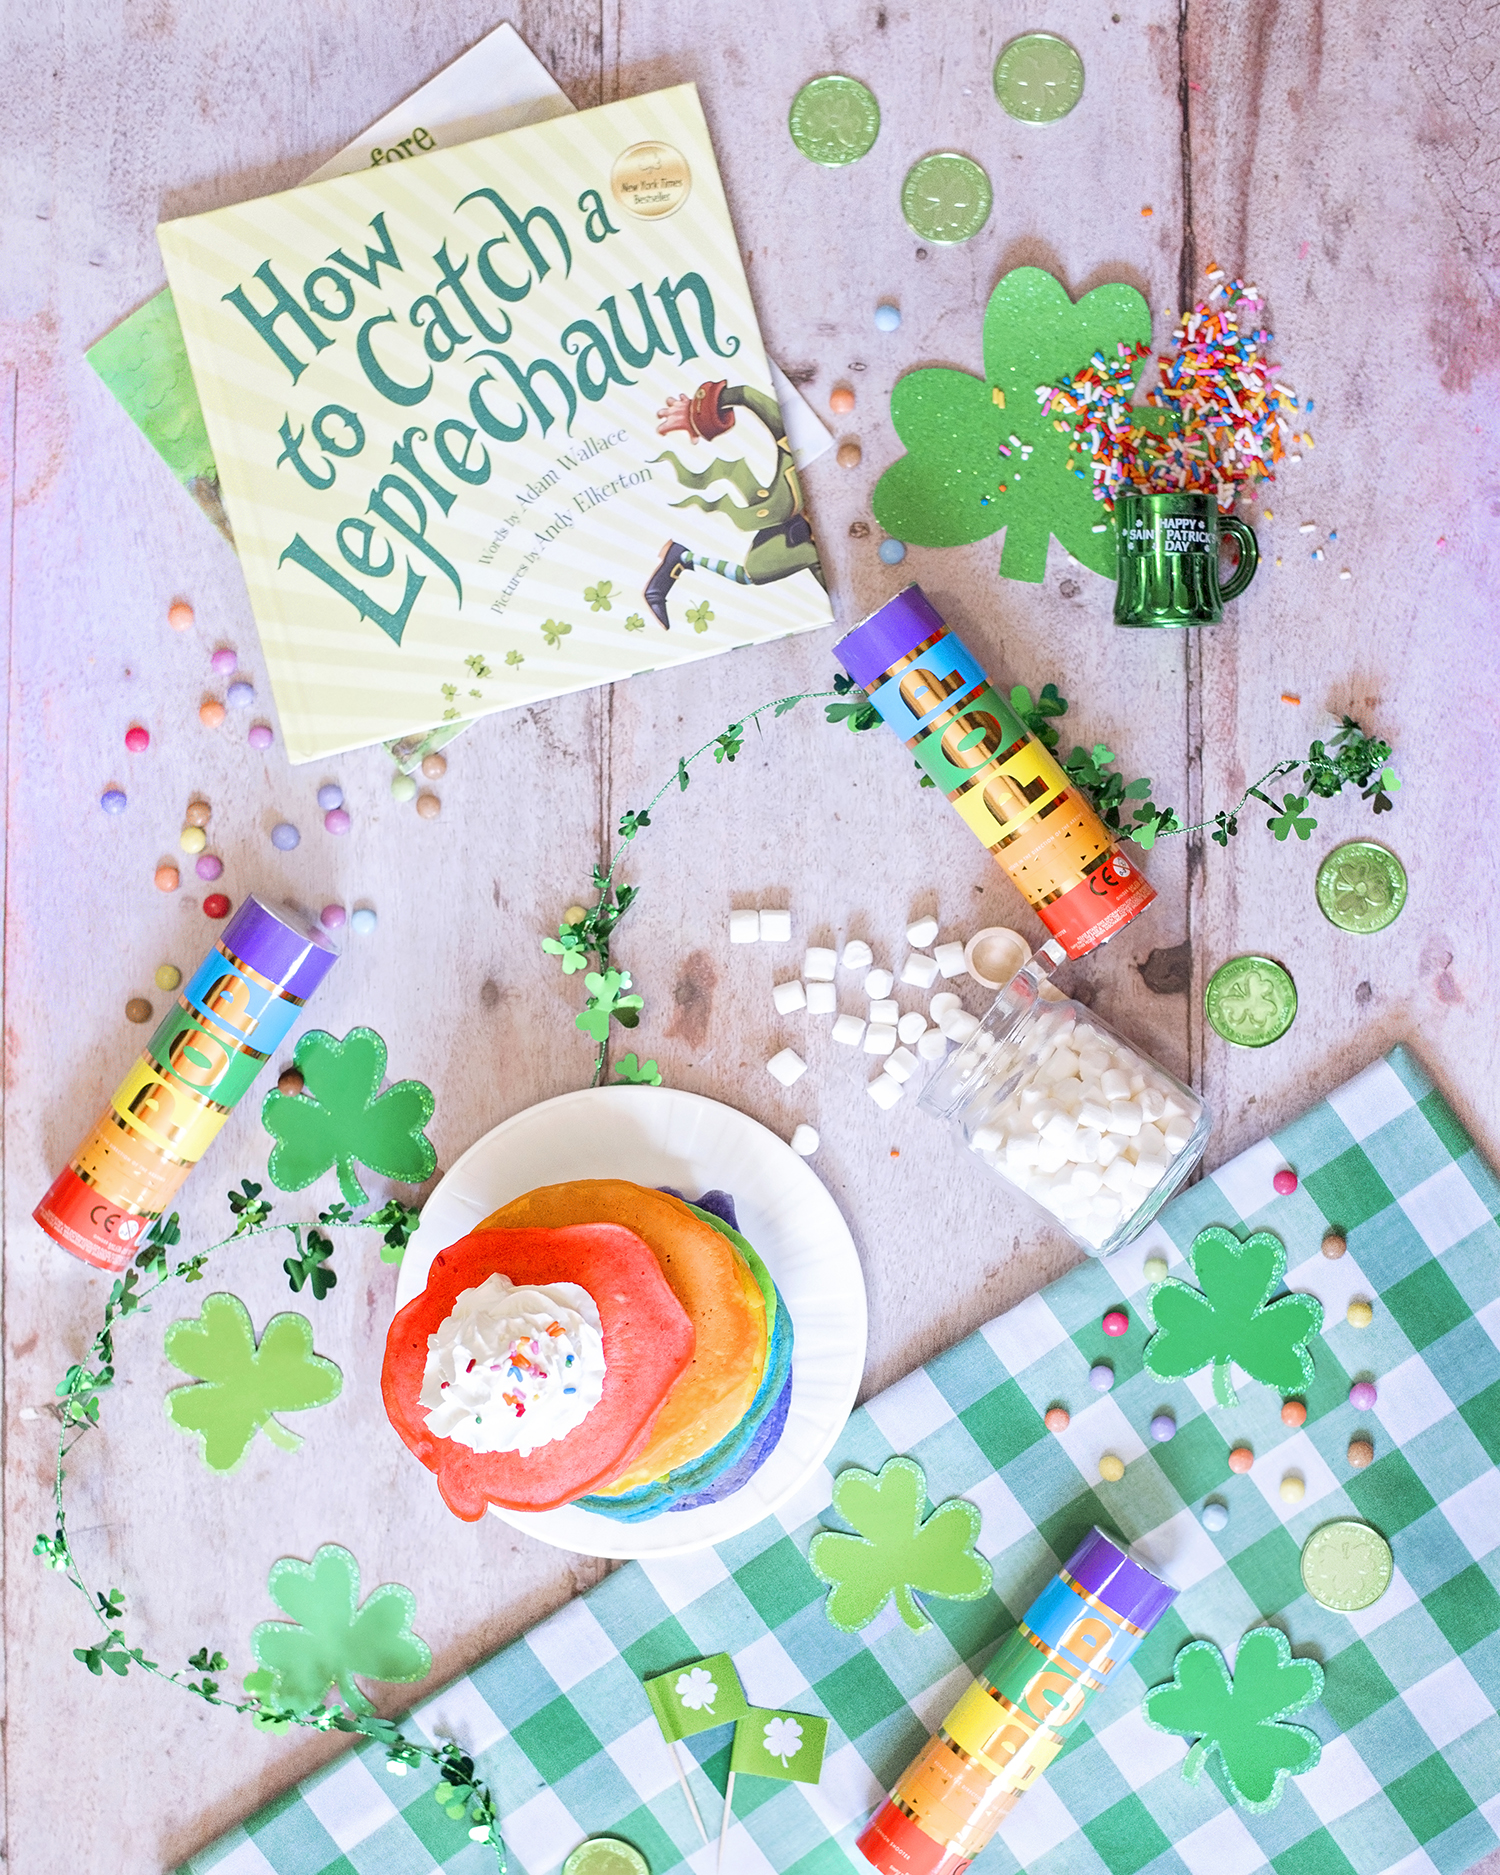 Top ten leprechaun pranks to pull on St. Patrick's day, How to catch a leprechaun book, rainbow pancakes and shamrock decorations.